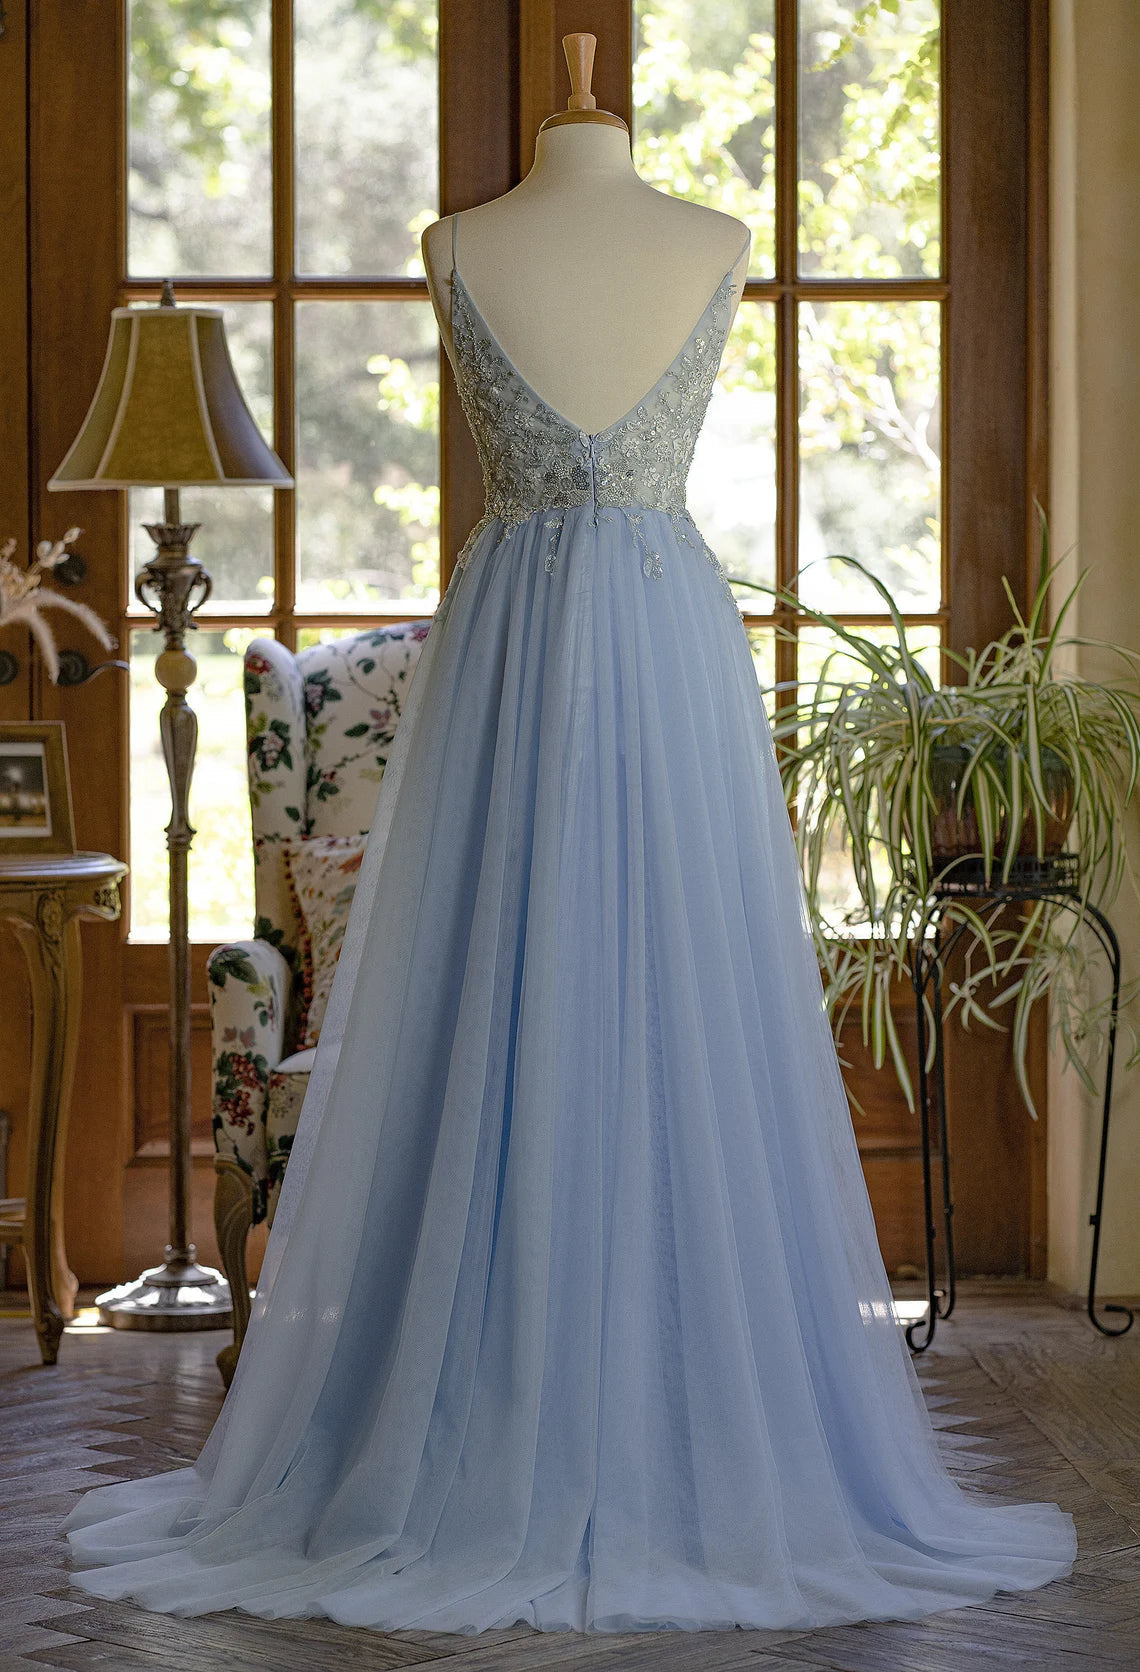 Party Dress Trends, Light Blue Tulle V-neckline Straps with Lace Long Party Dress, Blue A-line Prom Dress